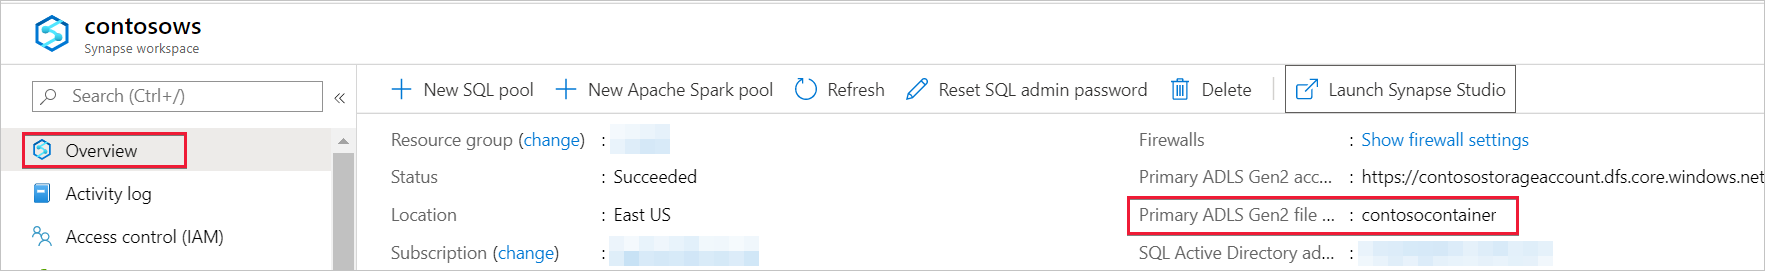 Screenshot of the Azure portal showing the name of the ADLS Gen2 storage file 'contosocontainer'.